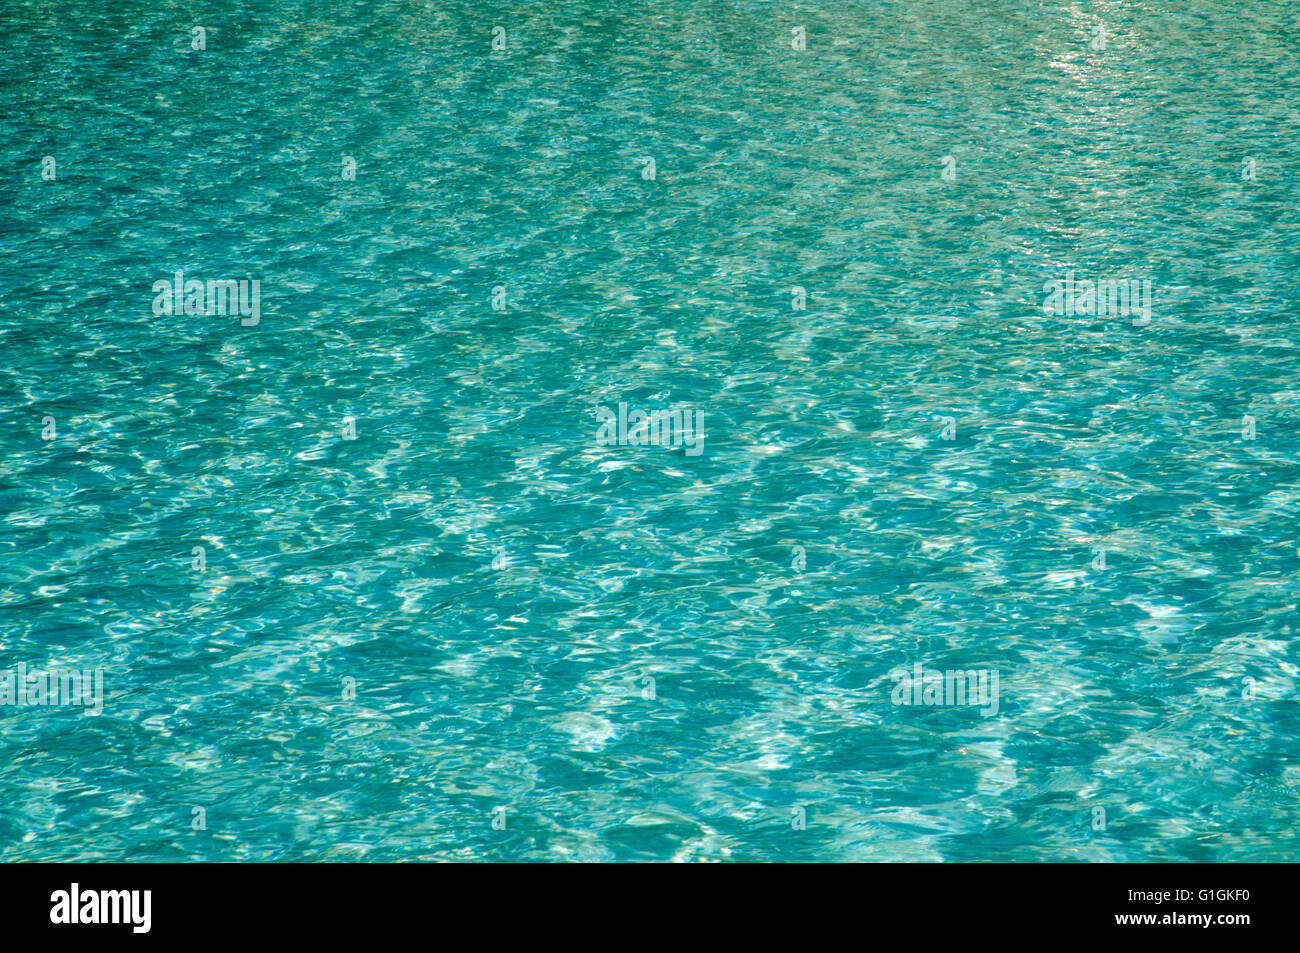 Turquoise blue water. Stock Photo